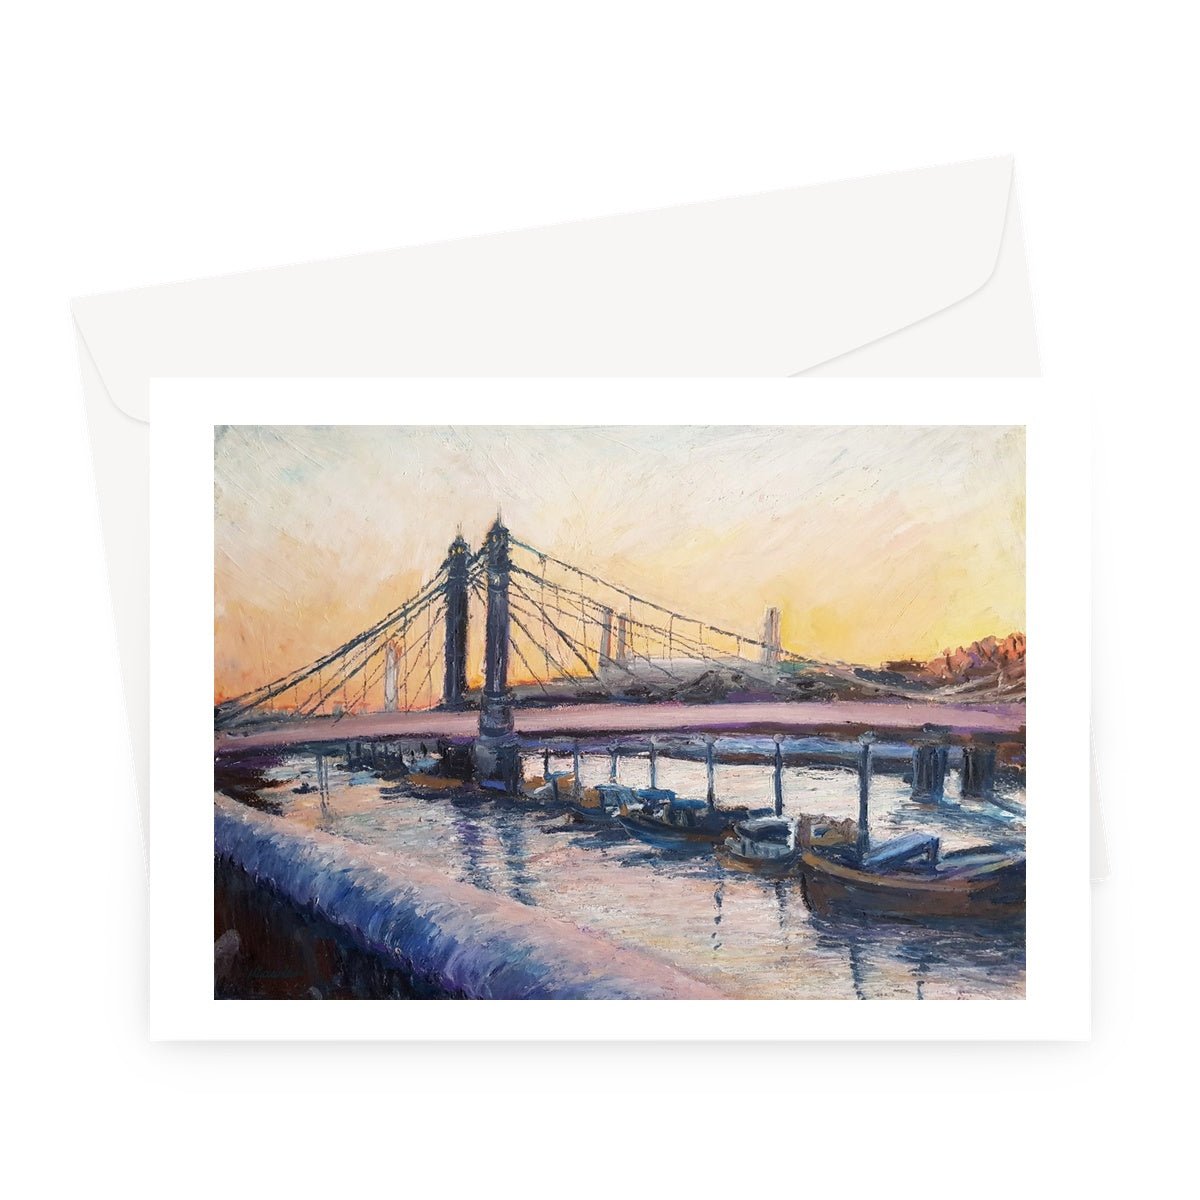 Snowy Albert Bridge on the River Thames, London | Greeting Cards Stationery Harriet Lawless Artist england